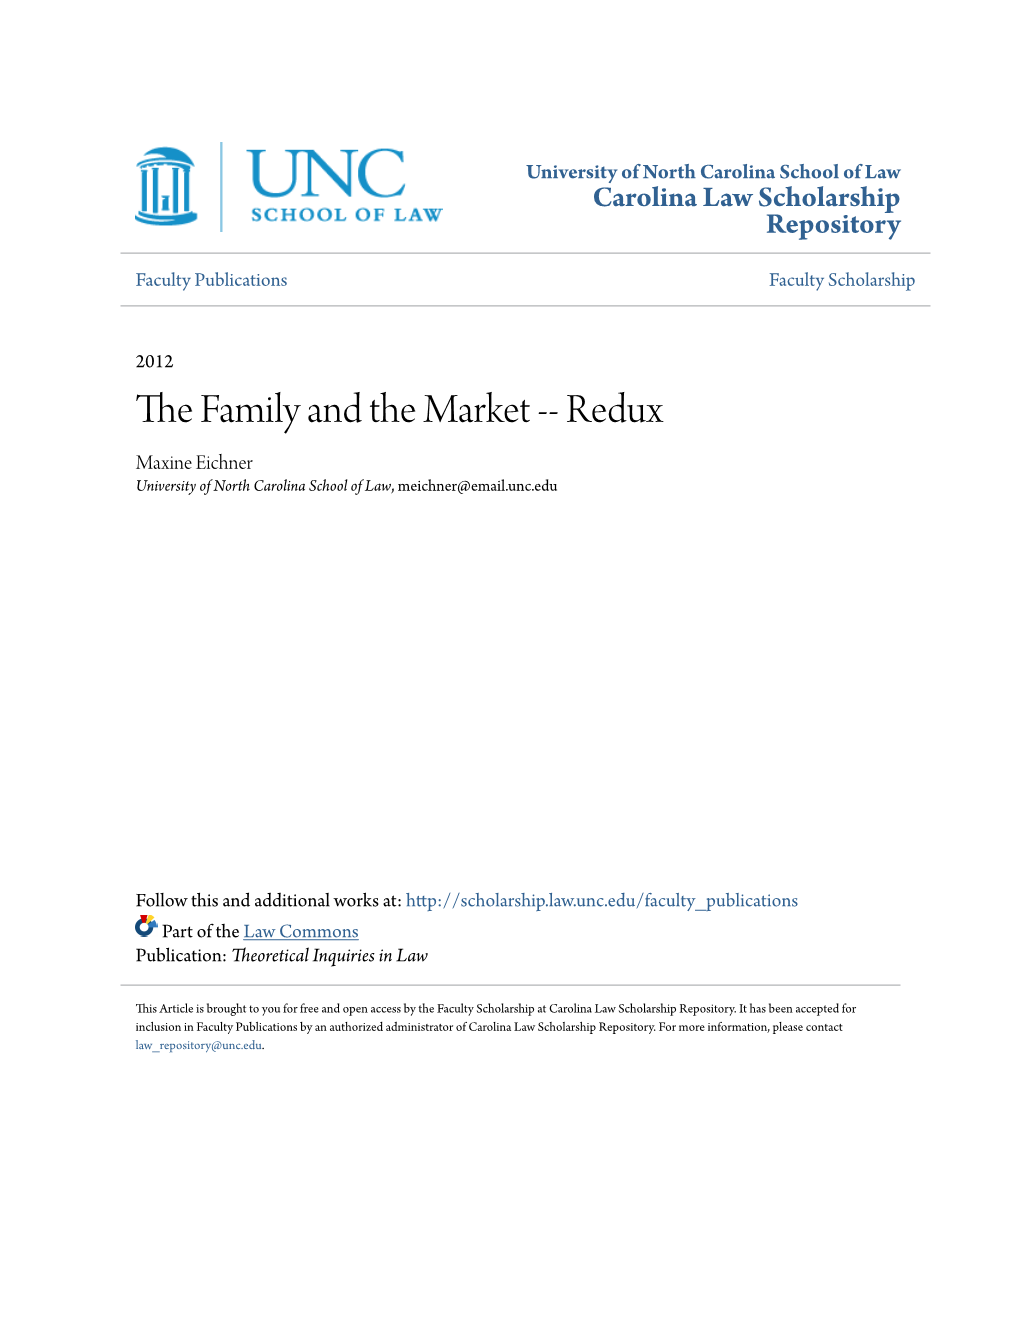 The Family and the Market -- Redux